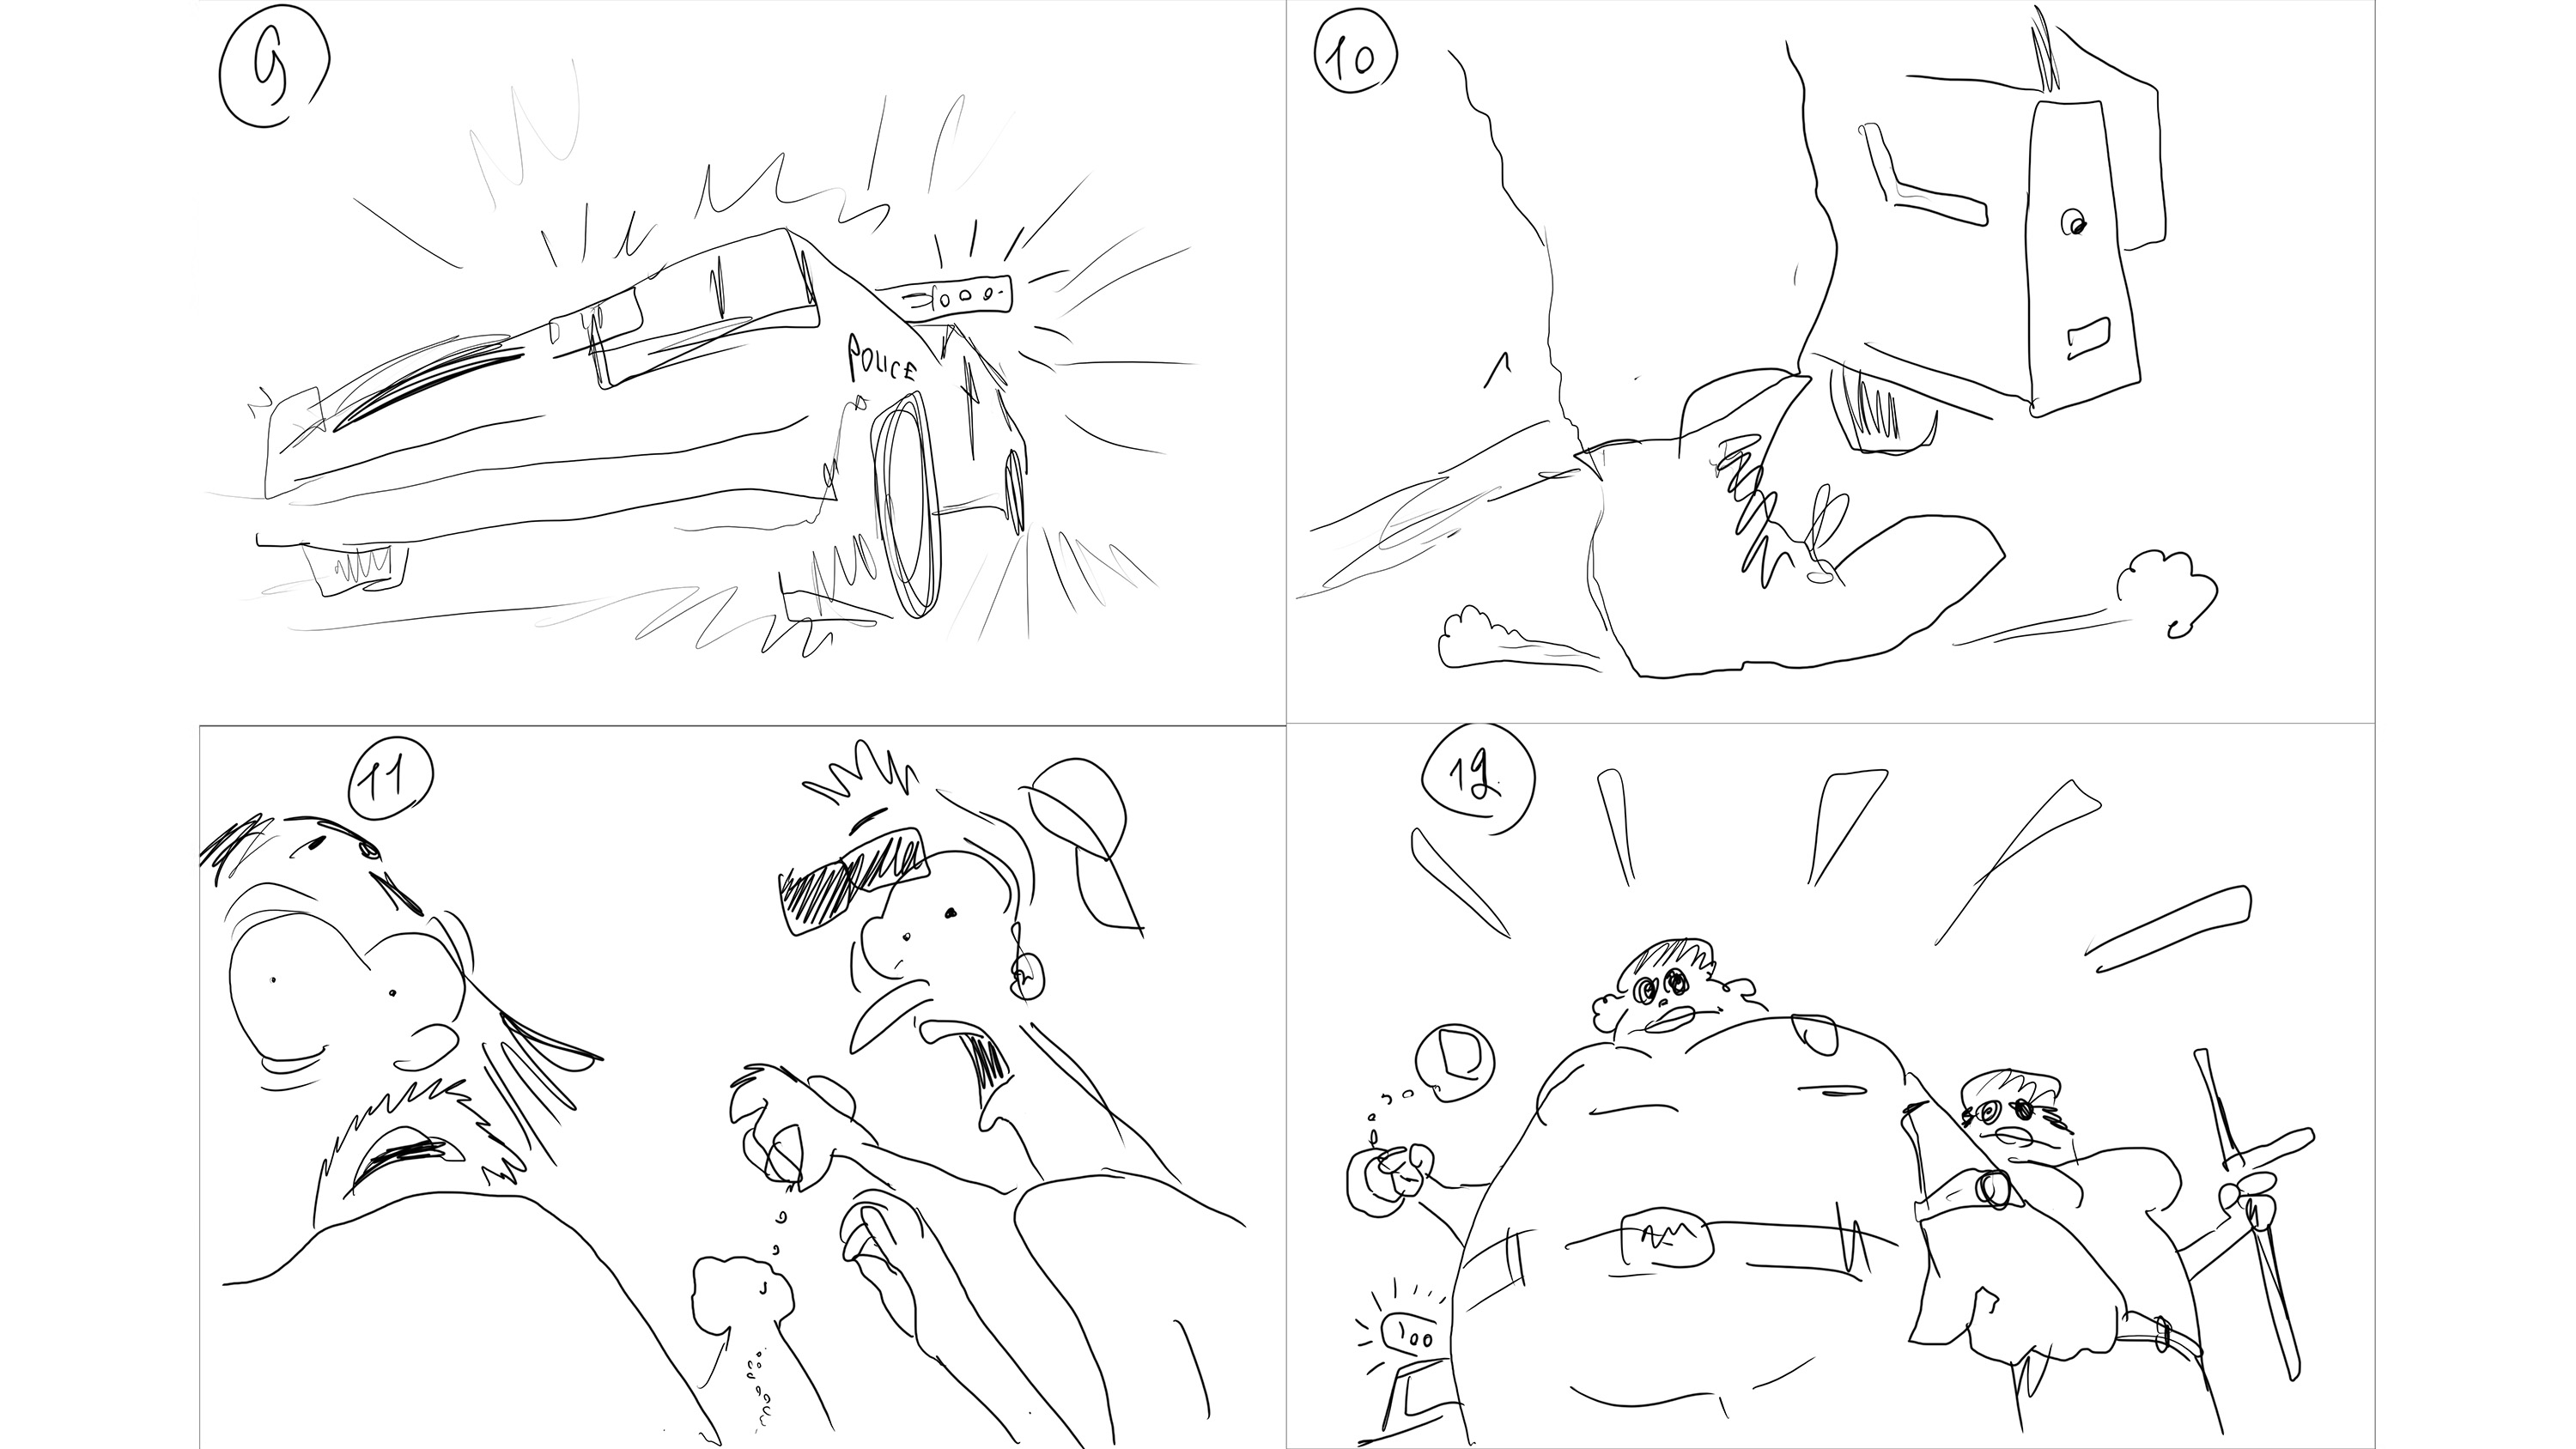 How to make a storyboard